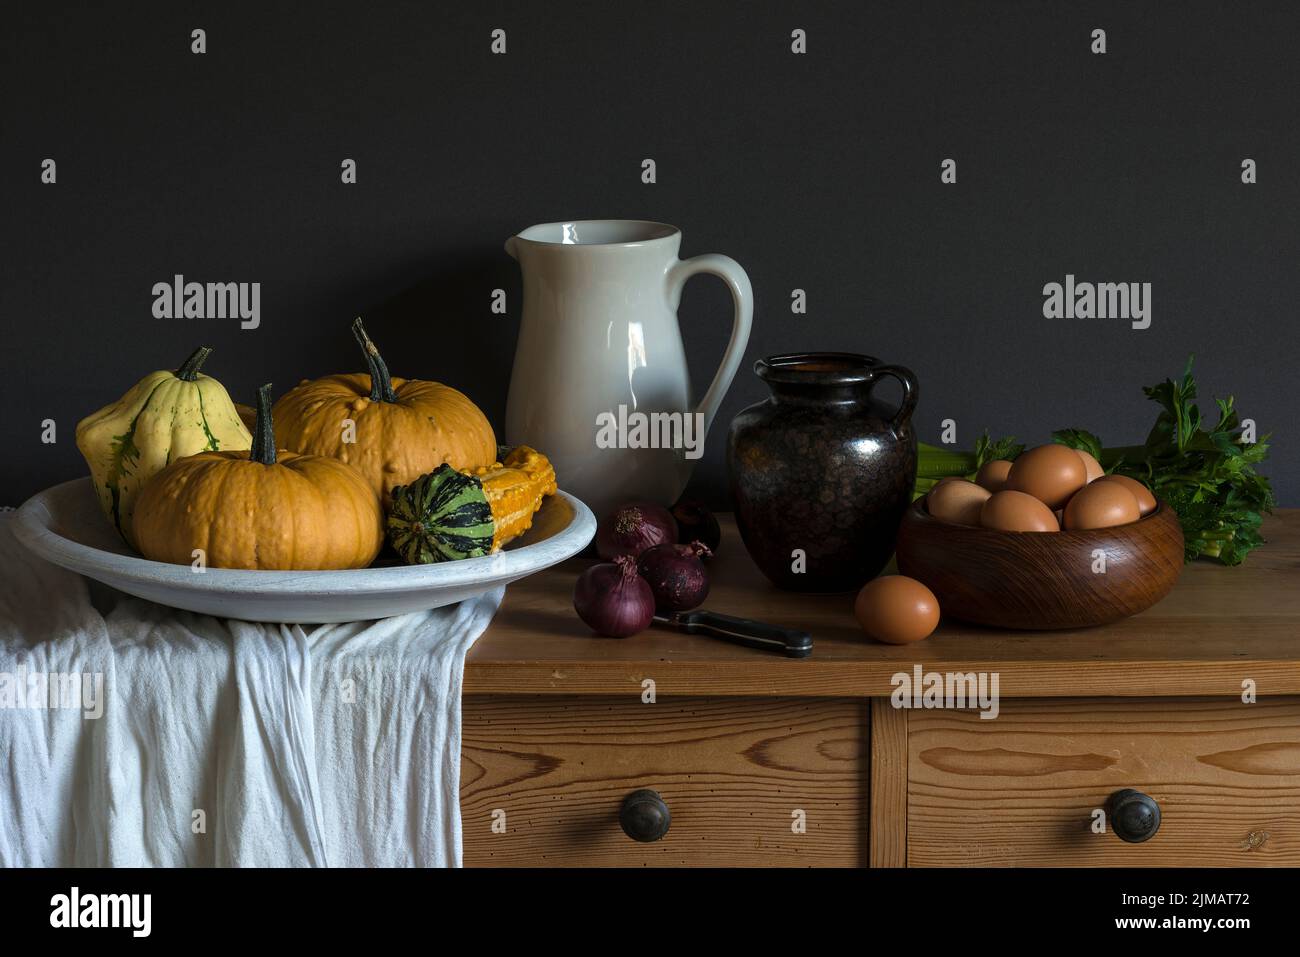 Still life based on a painting by an old master painter Stock Photo